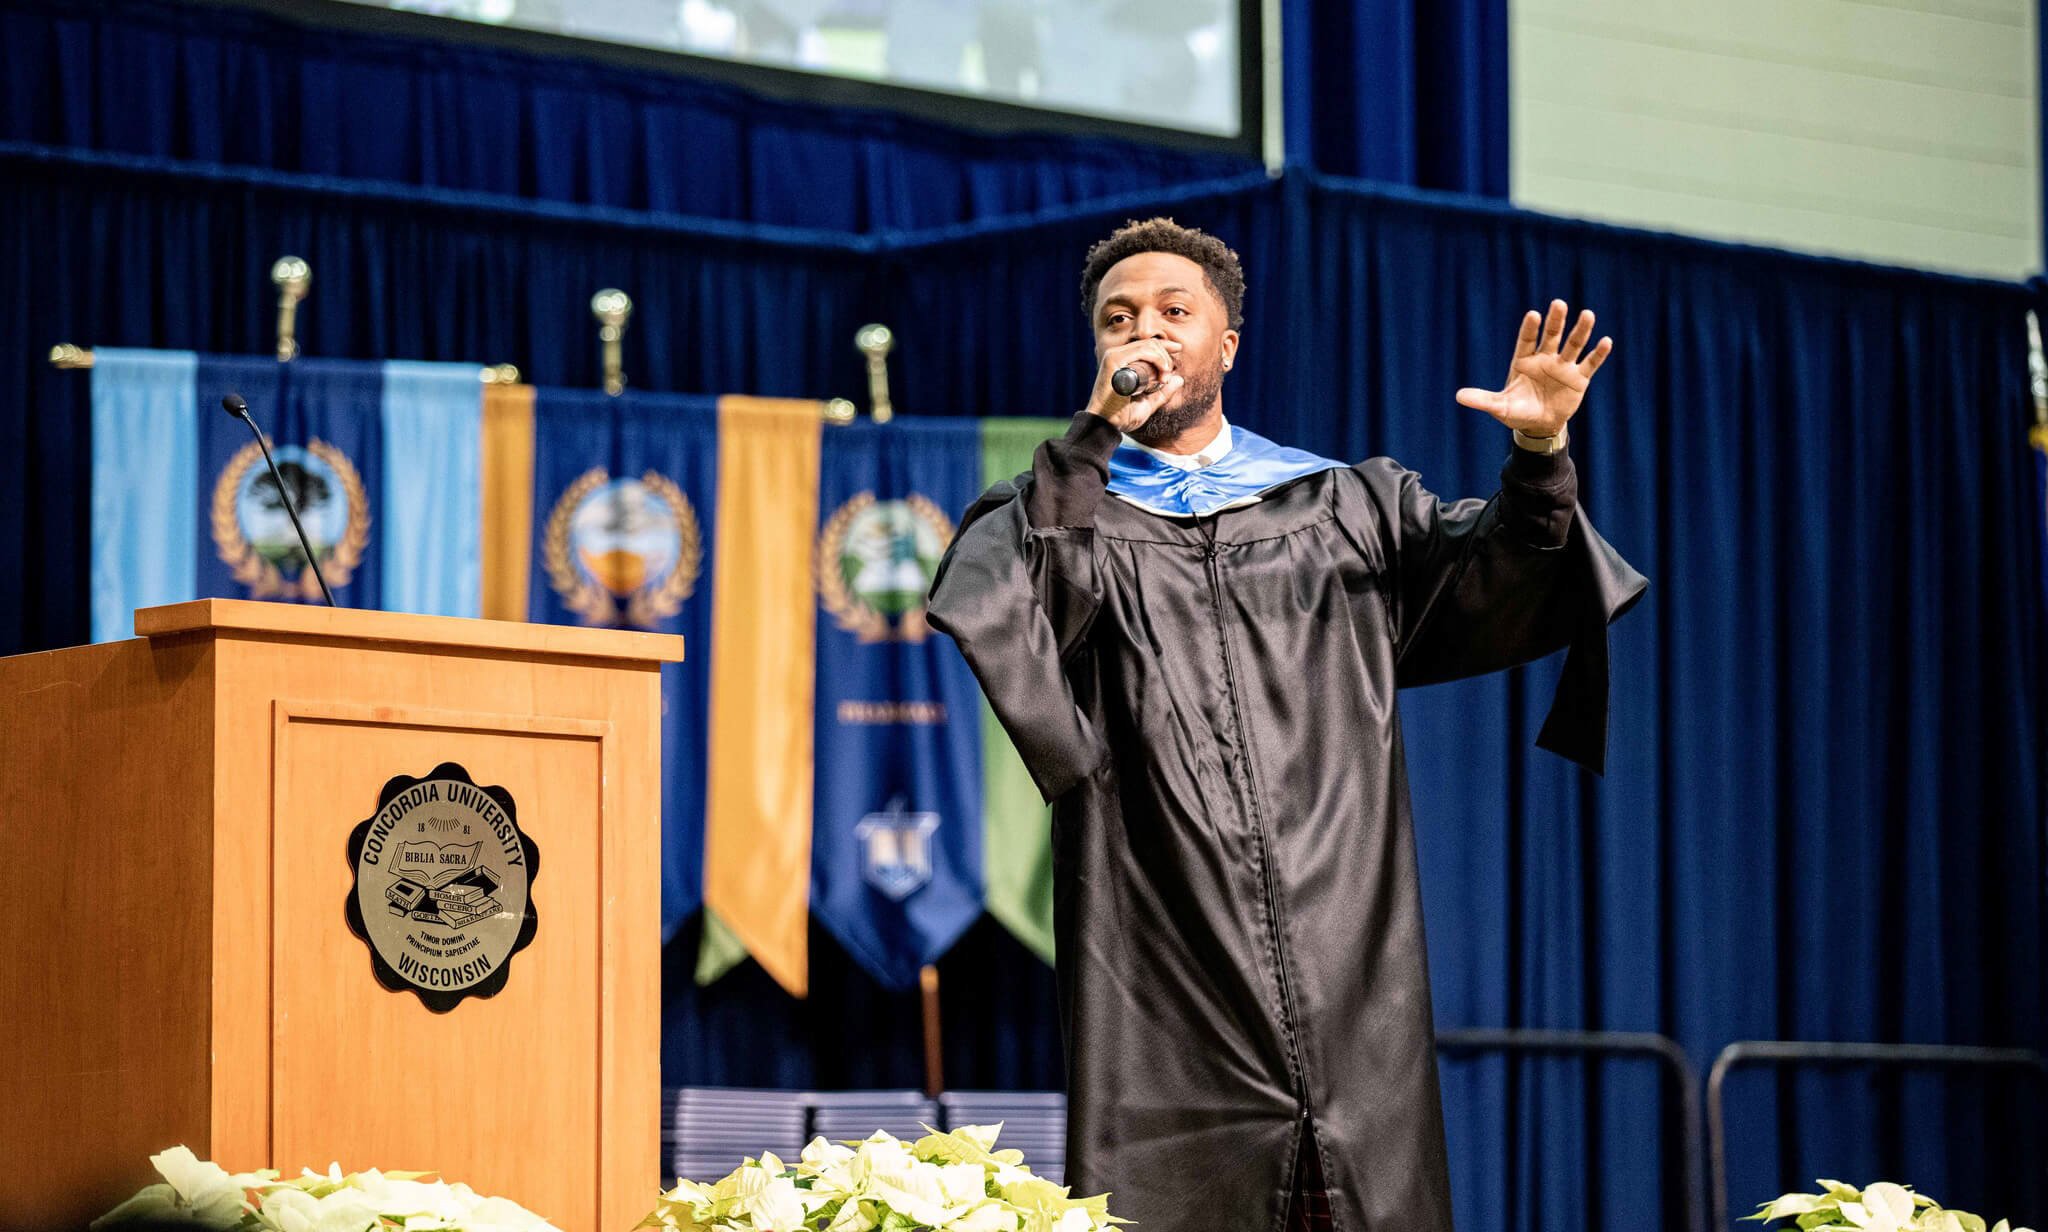 Grammy-nominated rapper Flame spoke at CUW's commencement